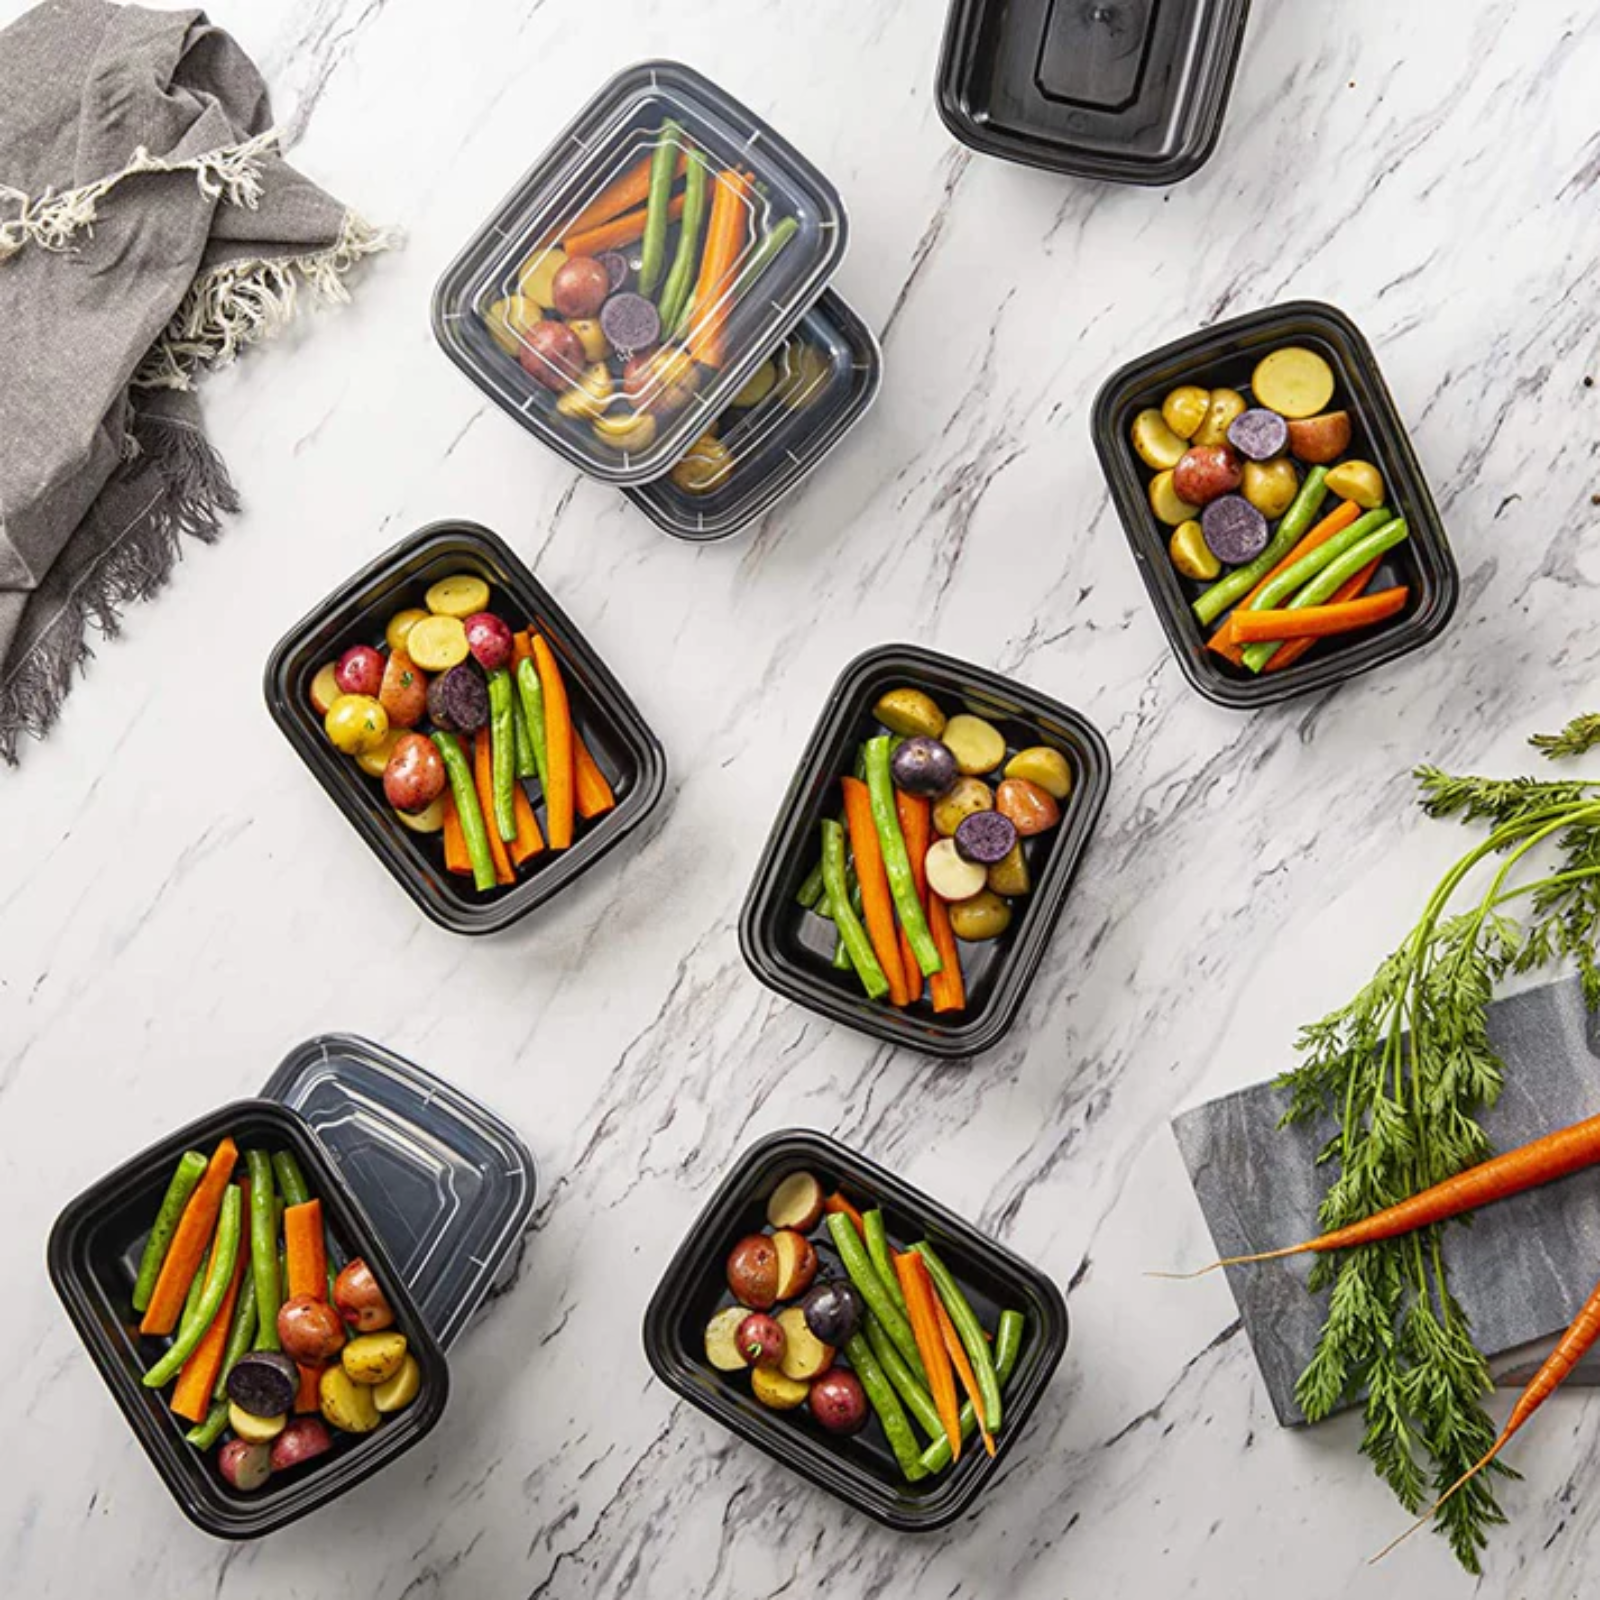 *WHOLESALE* 38oz. Black Rectangular Containers with clear lids | 150 ct/Case Food Storage & Serving VeZee   